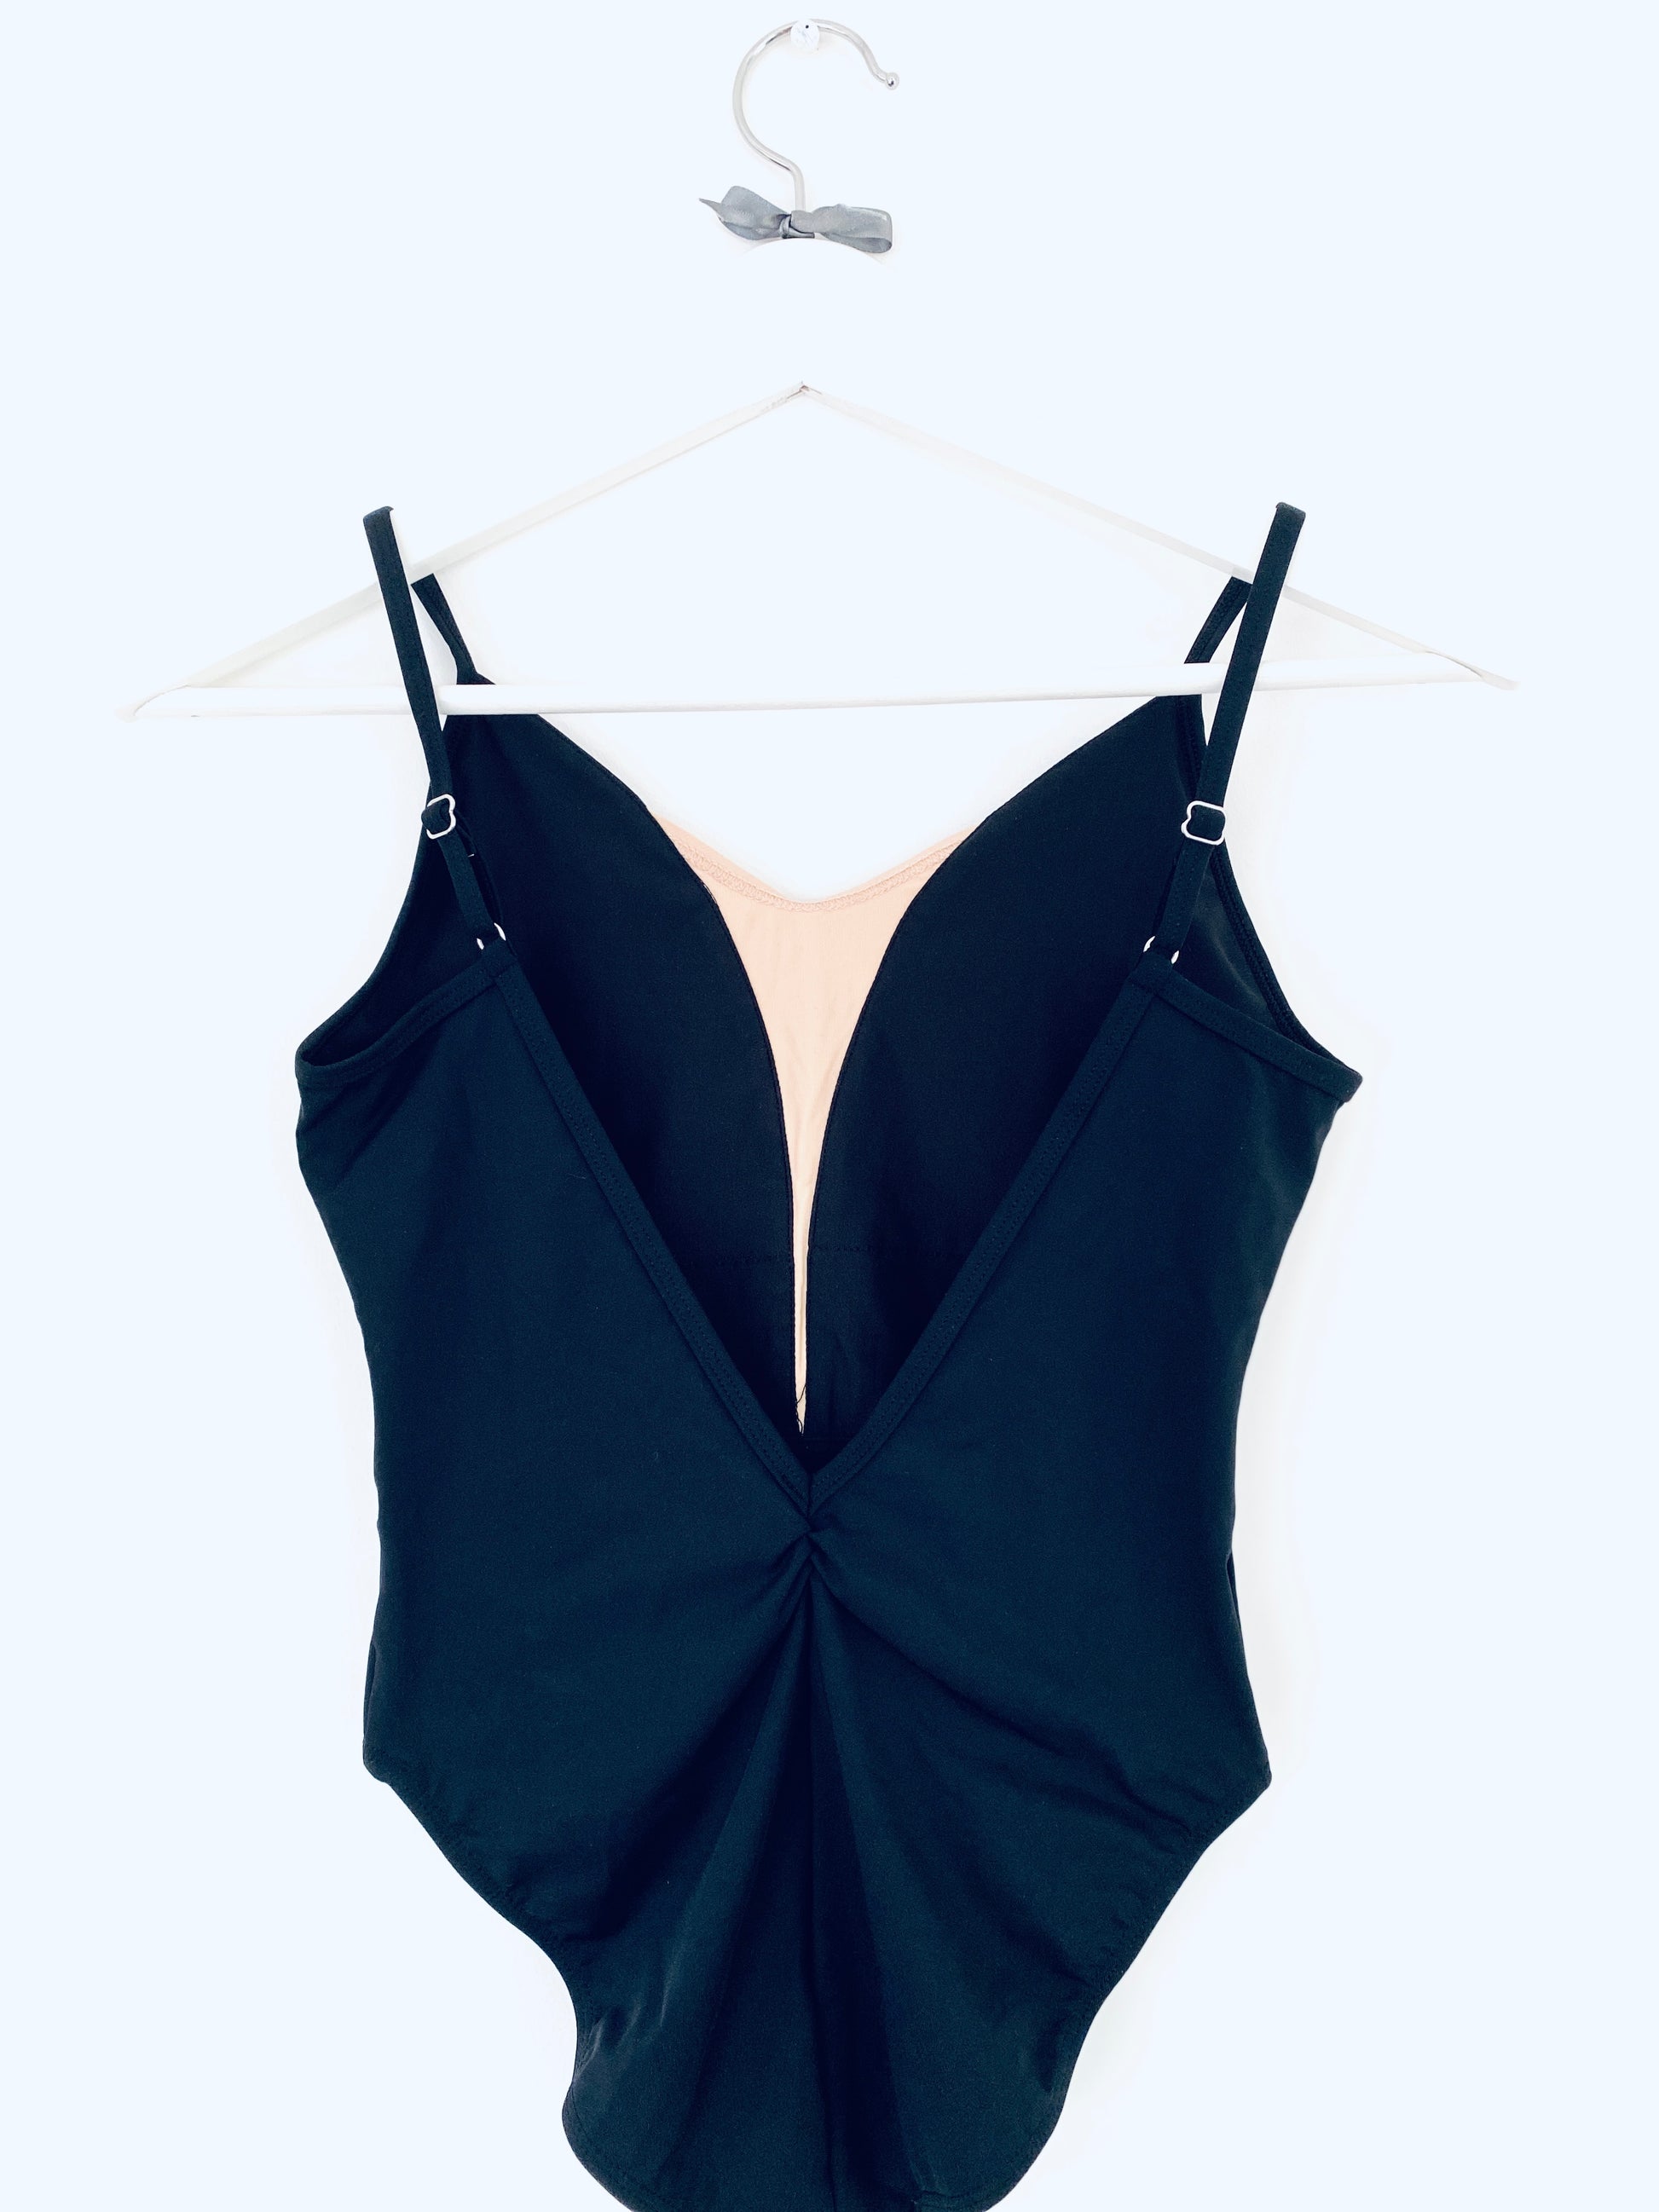 Black camisole ballet leotard with deep back from The Collective Dancewear